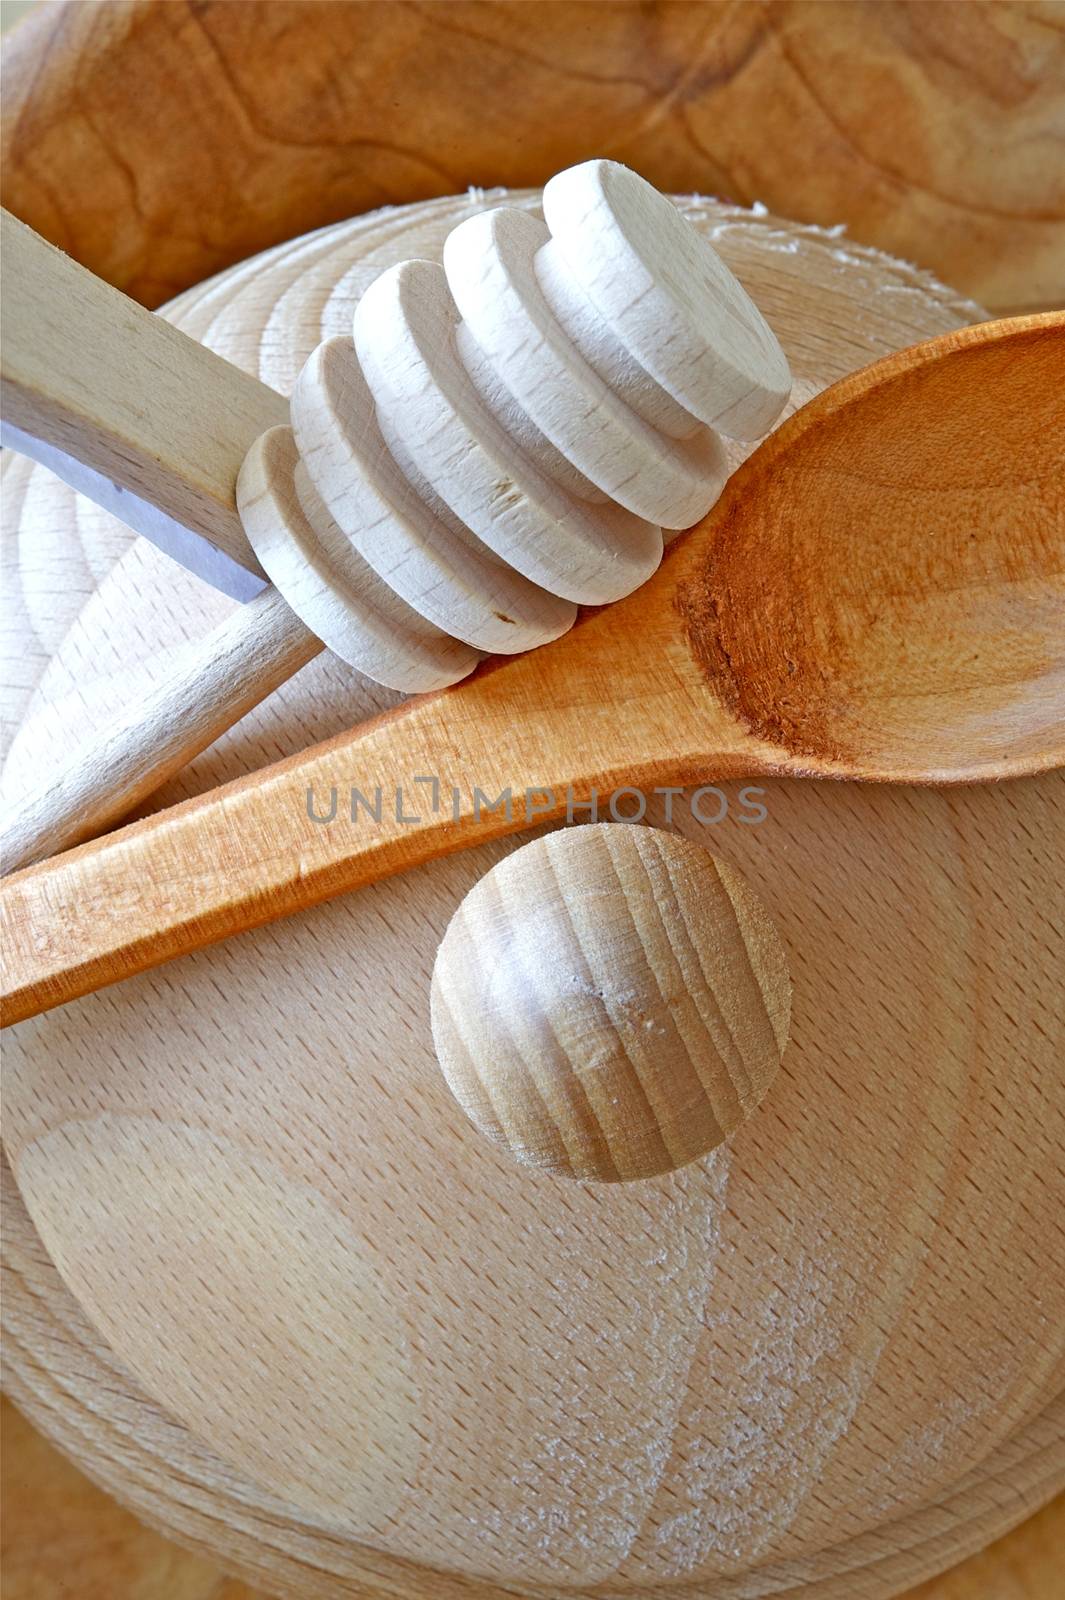 Raw Wood Kitchen Tools by welcomia